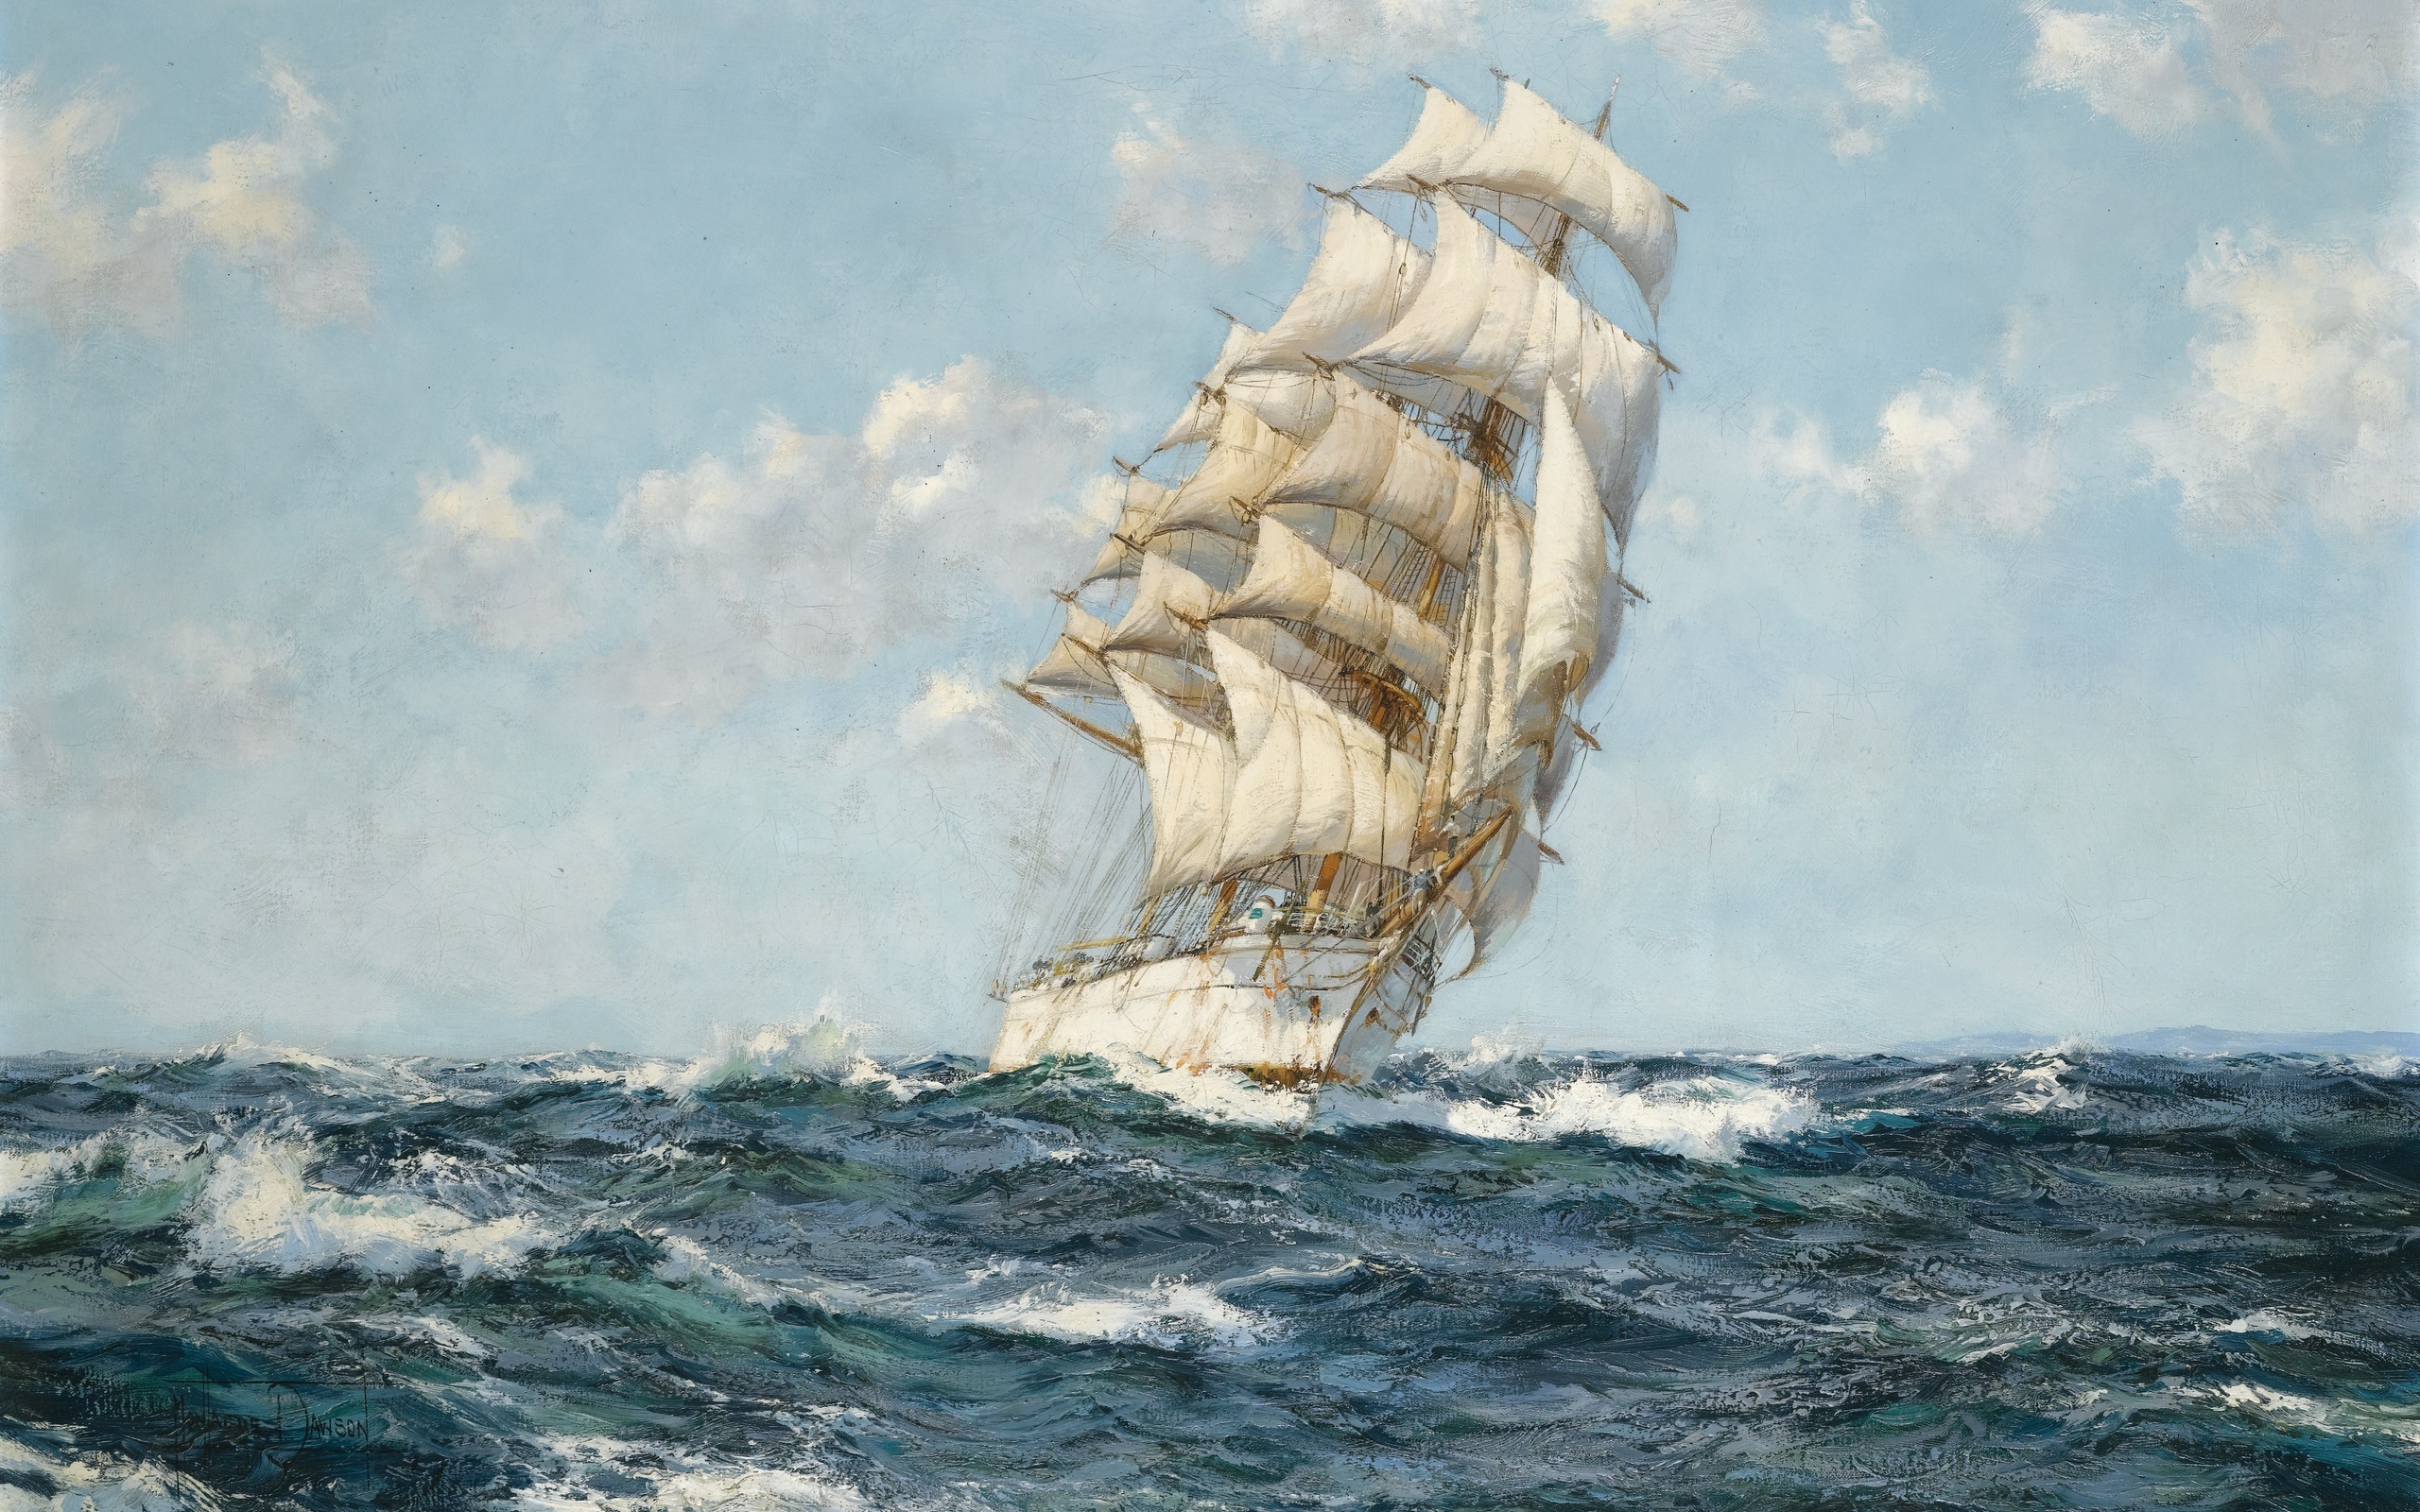 Artistic sailing ship hd papers and backgrounds